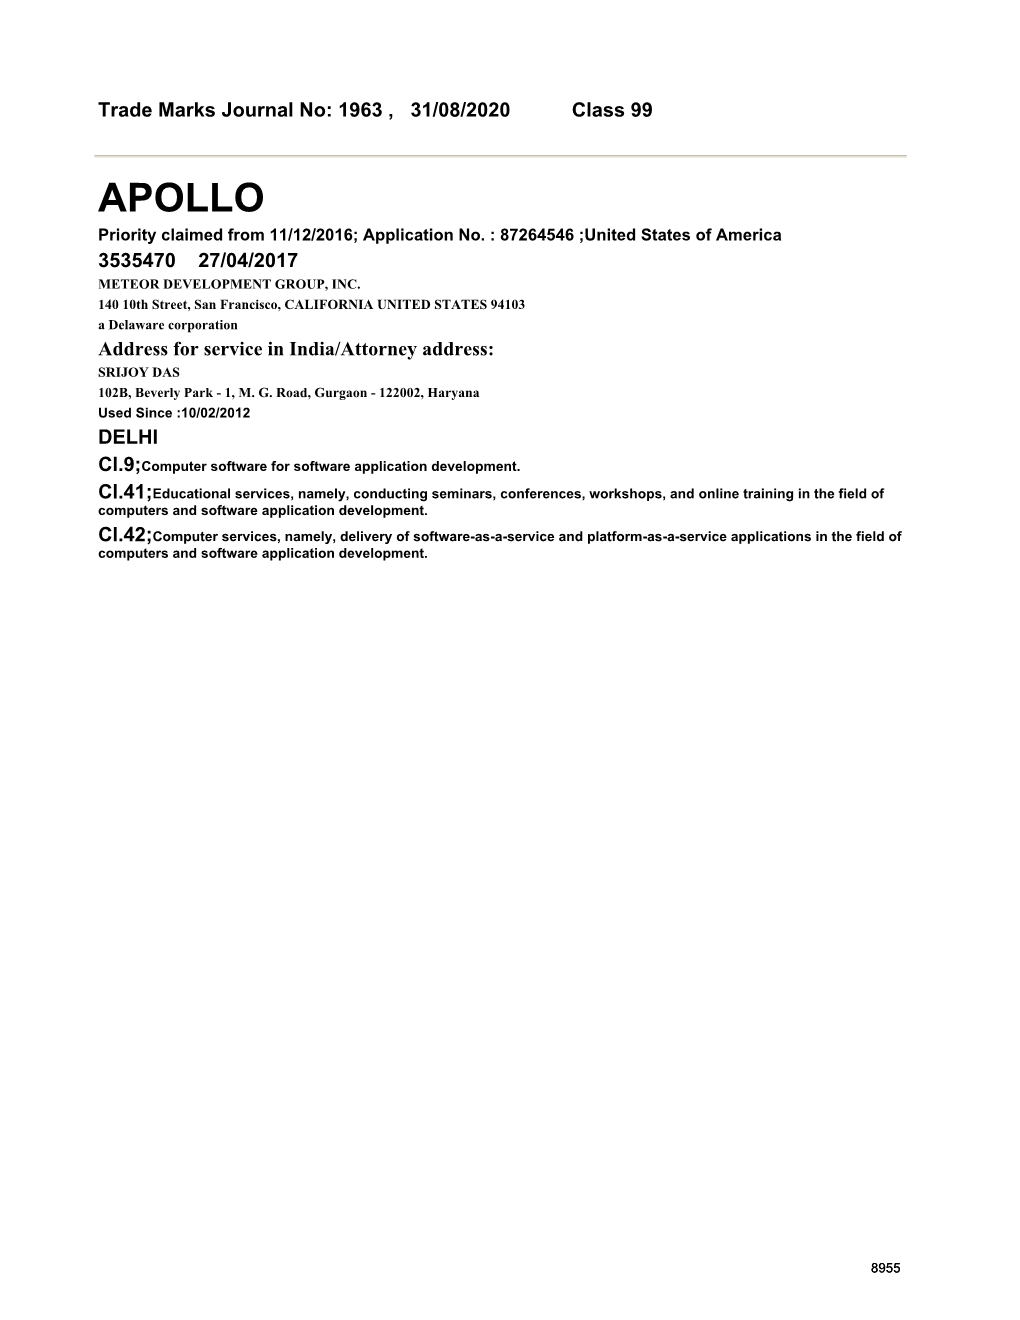 APOLLO Priority Claimed from 11/12/2016; Application No